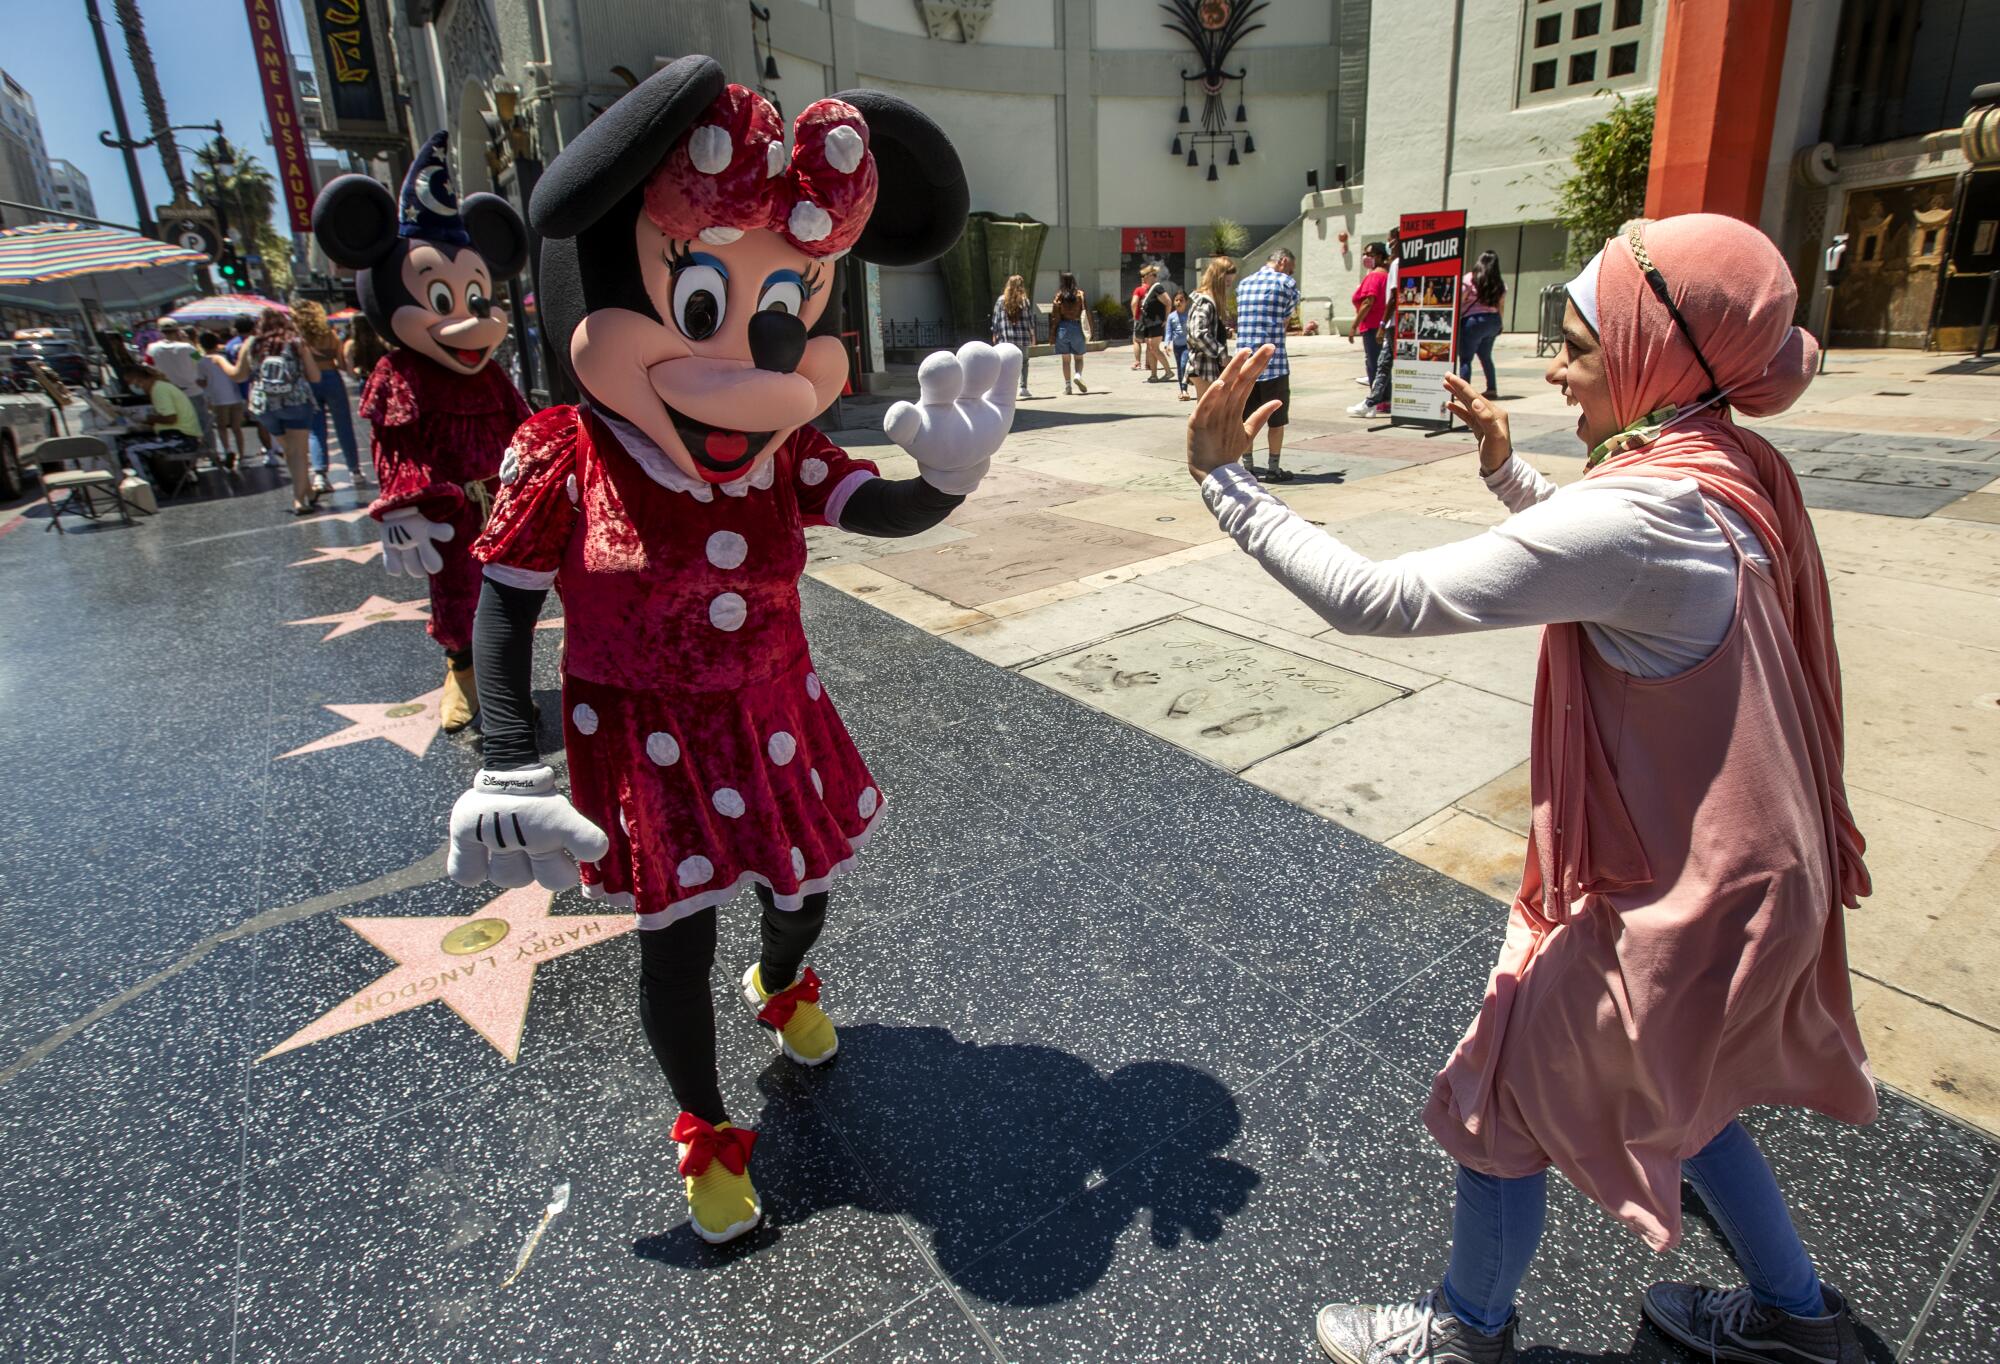 A teenage girl greets a street performer dressed up as Minnie Mouse.